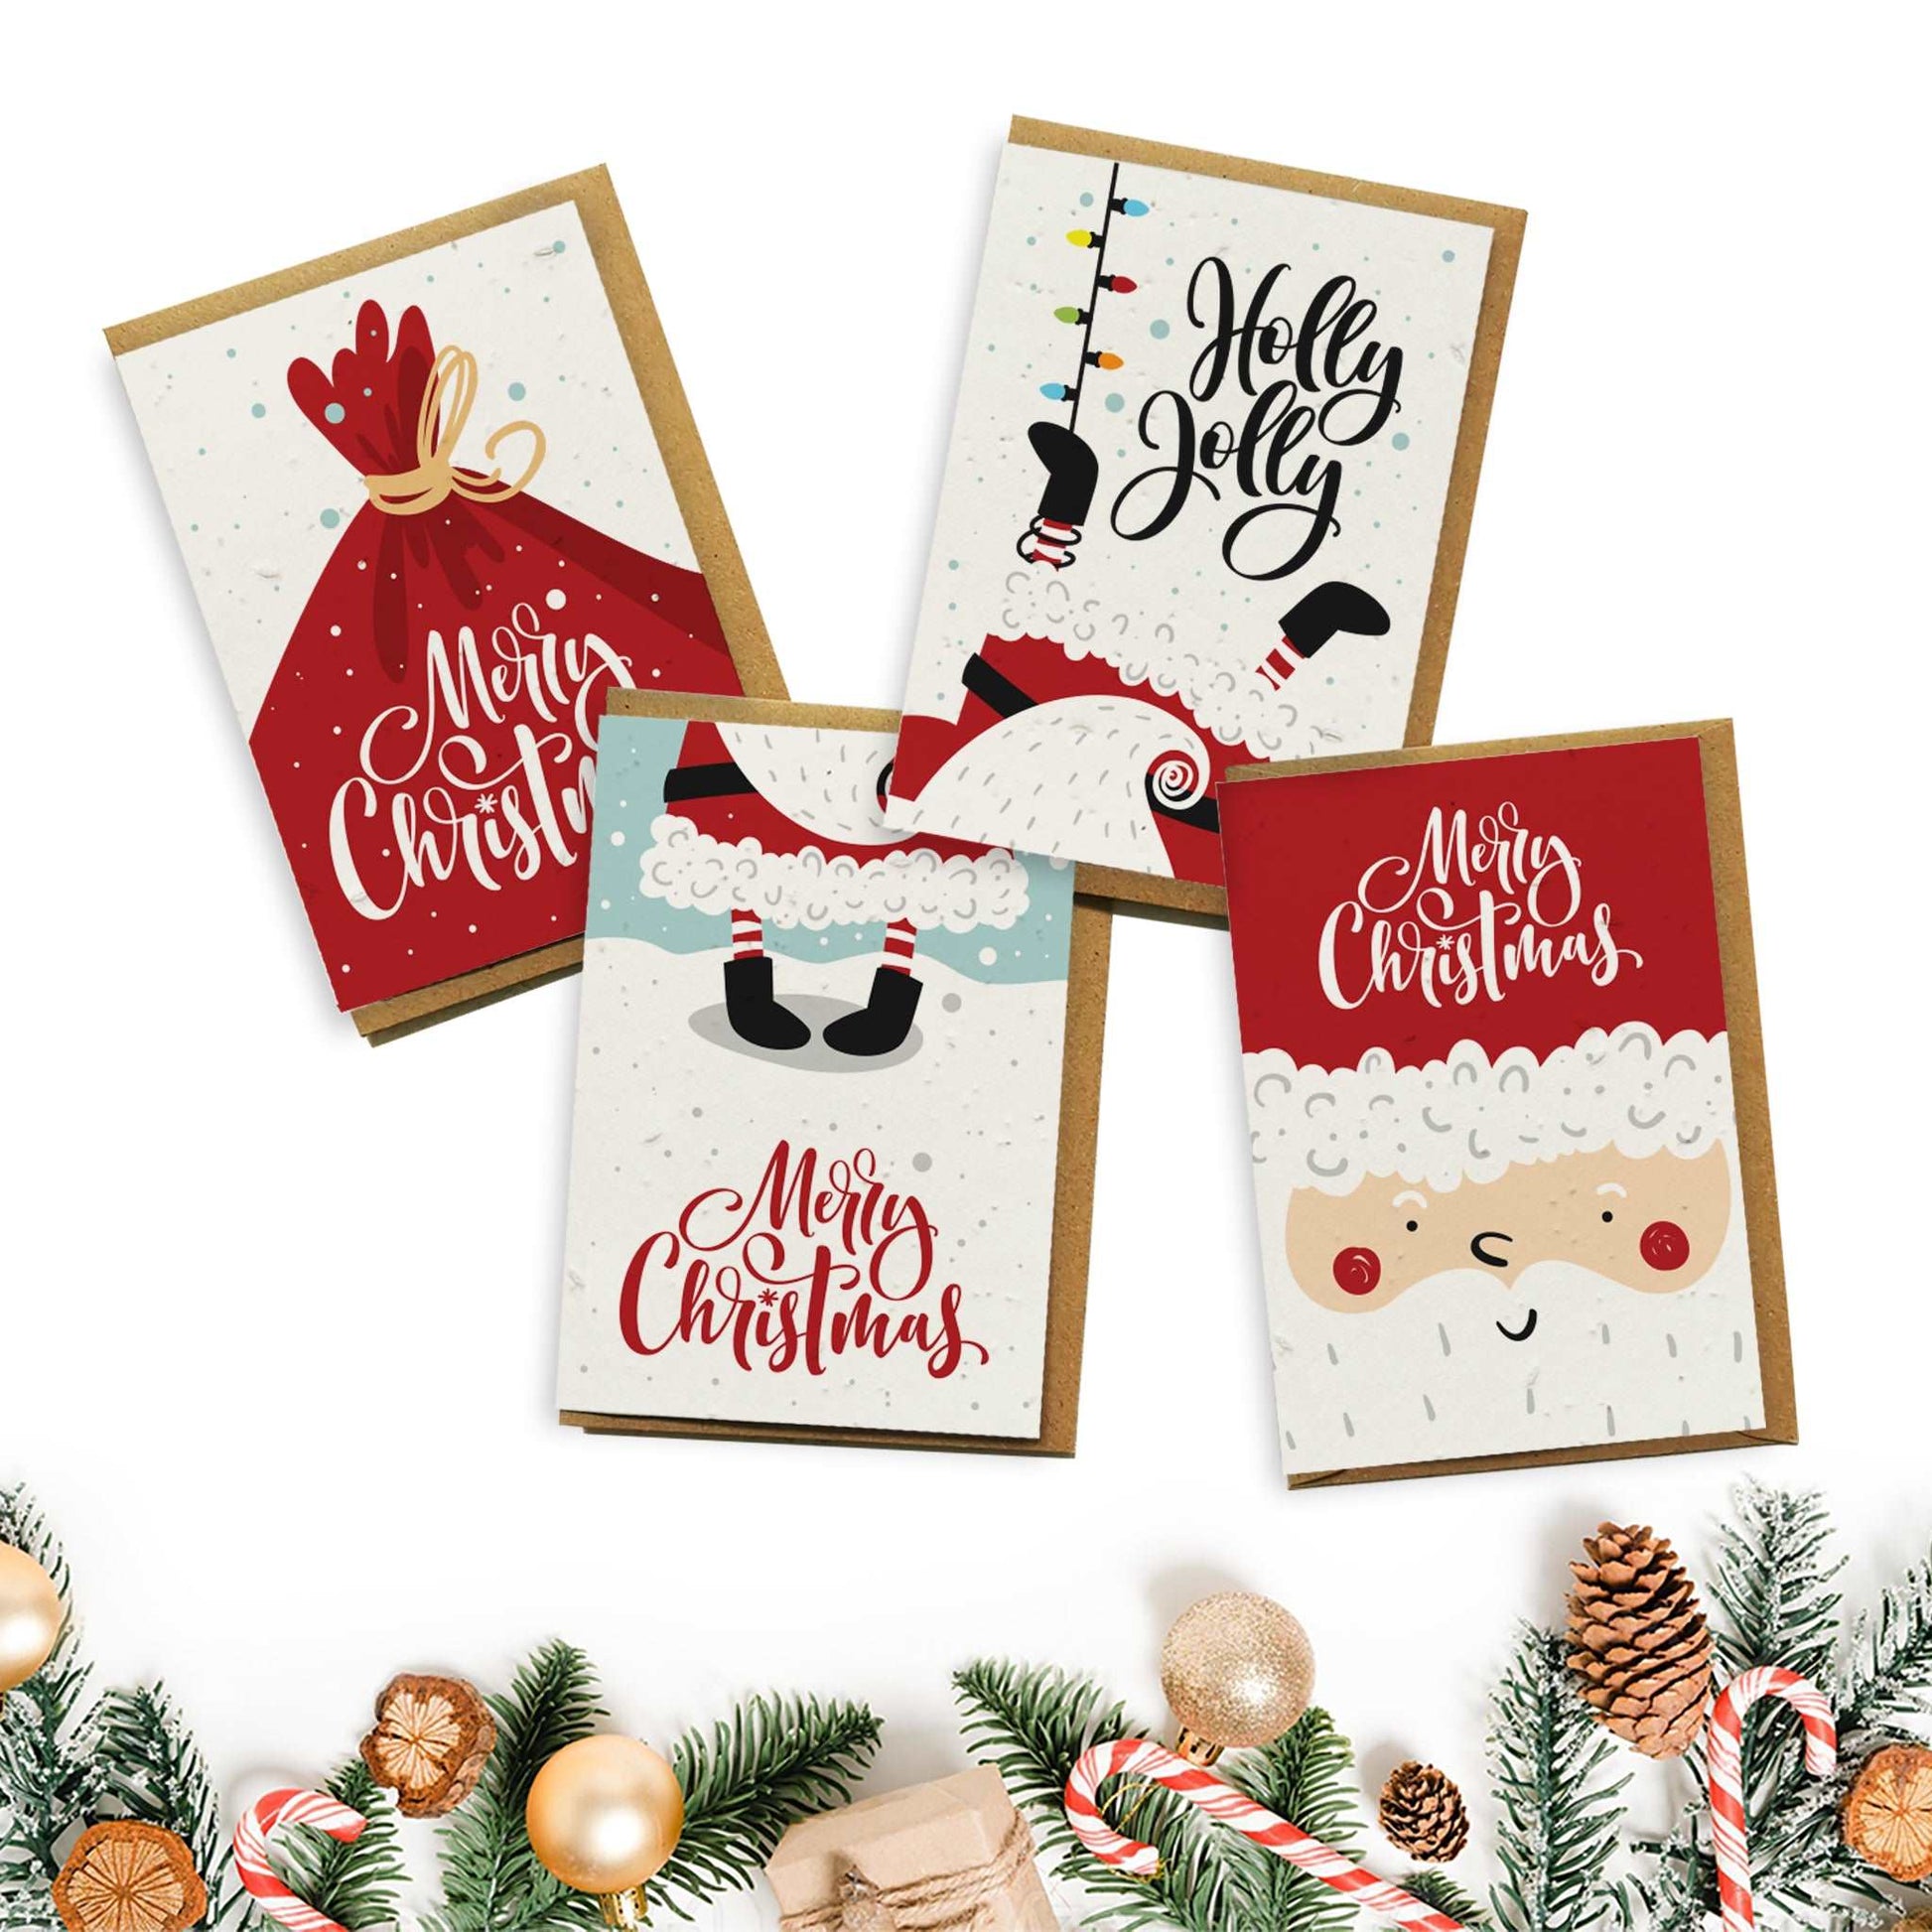 Plantable Seed Paper Christmas Cards 4-Pack - Down the Chimney Greeting Card Little Green Paper Shop